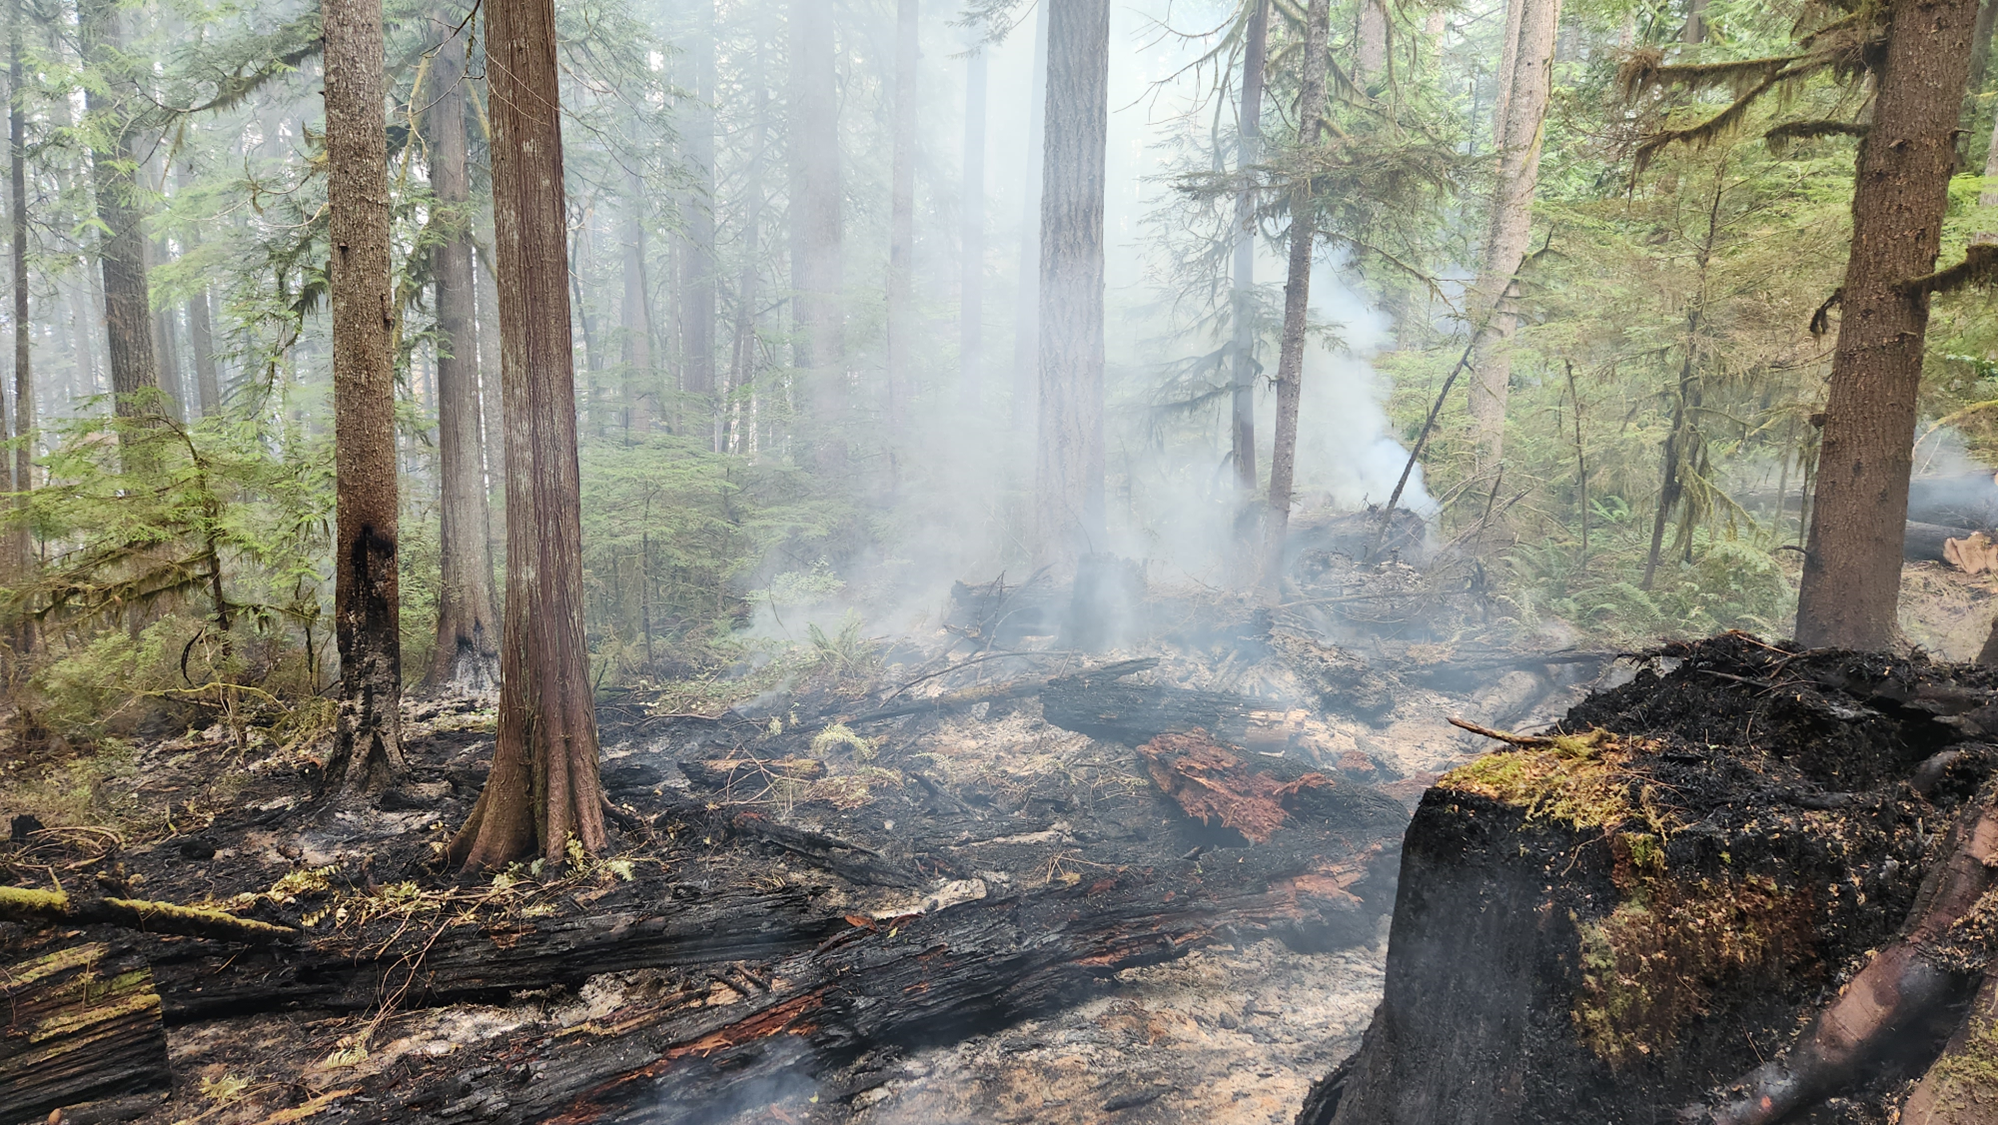 smoke rises from a burned log on the forest floor